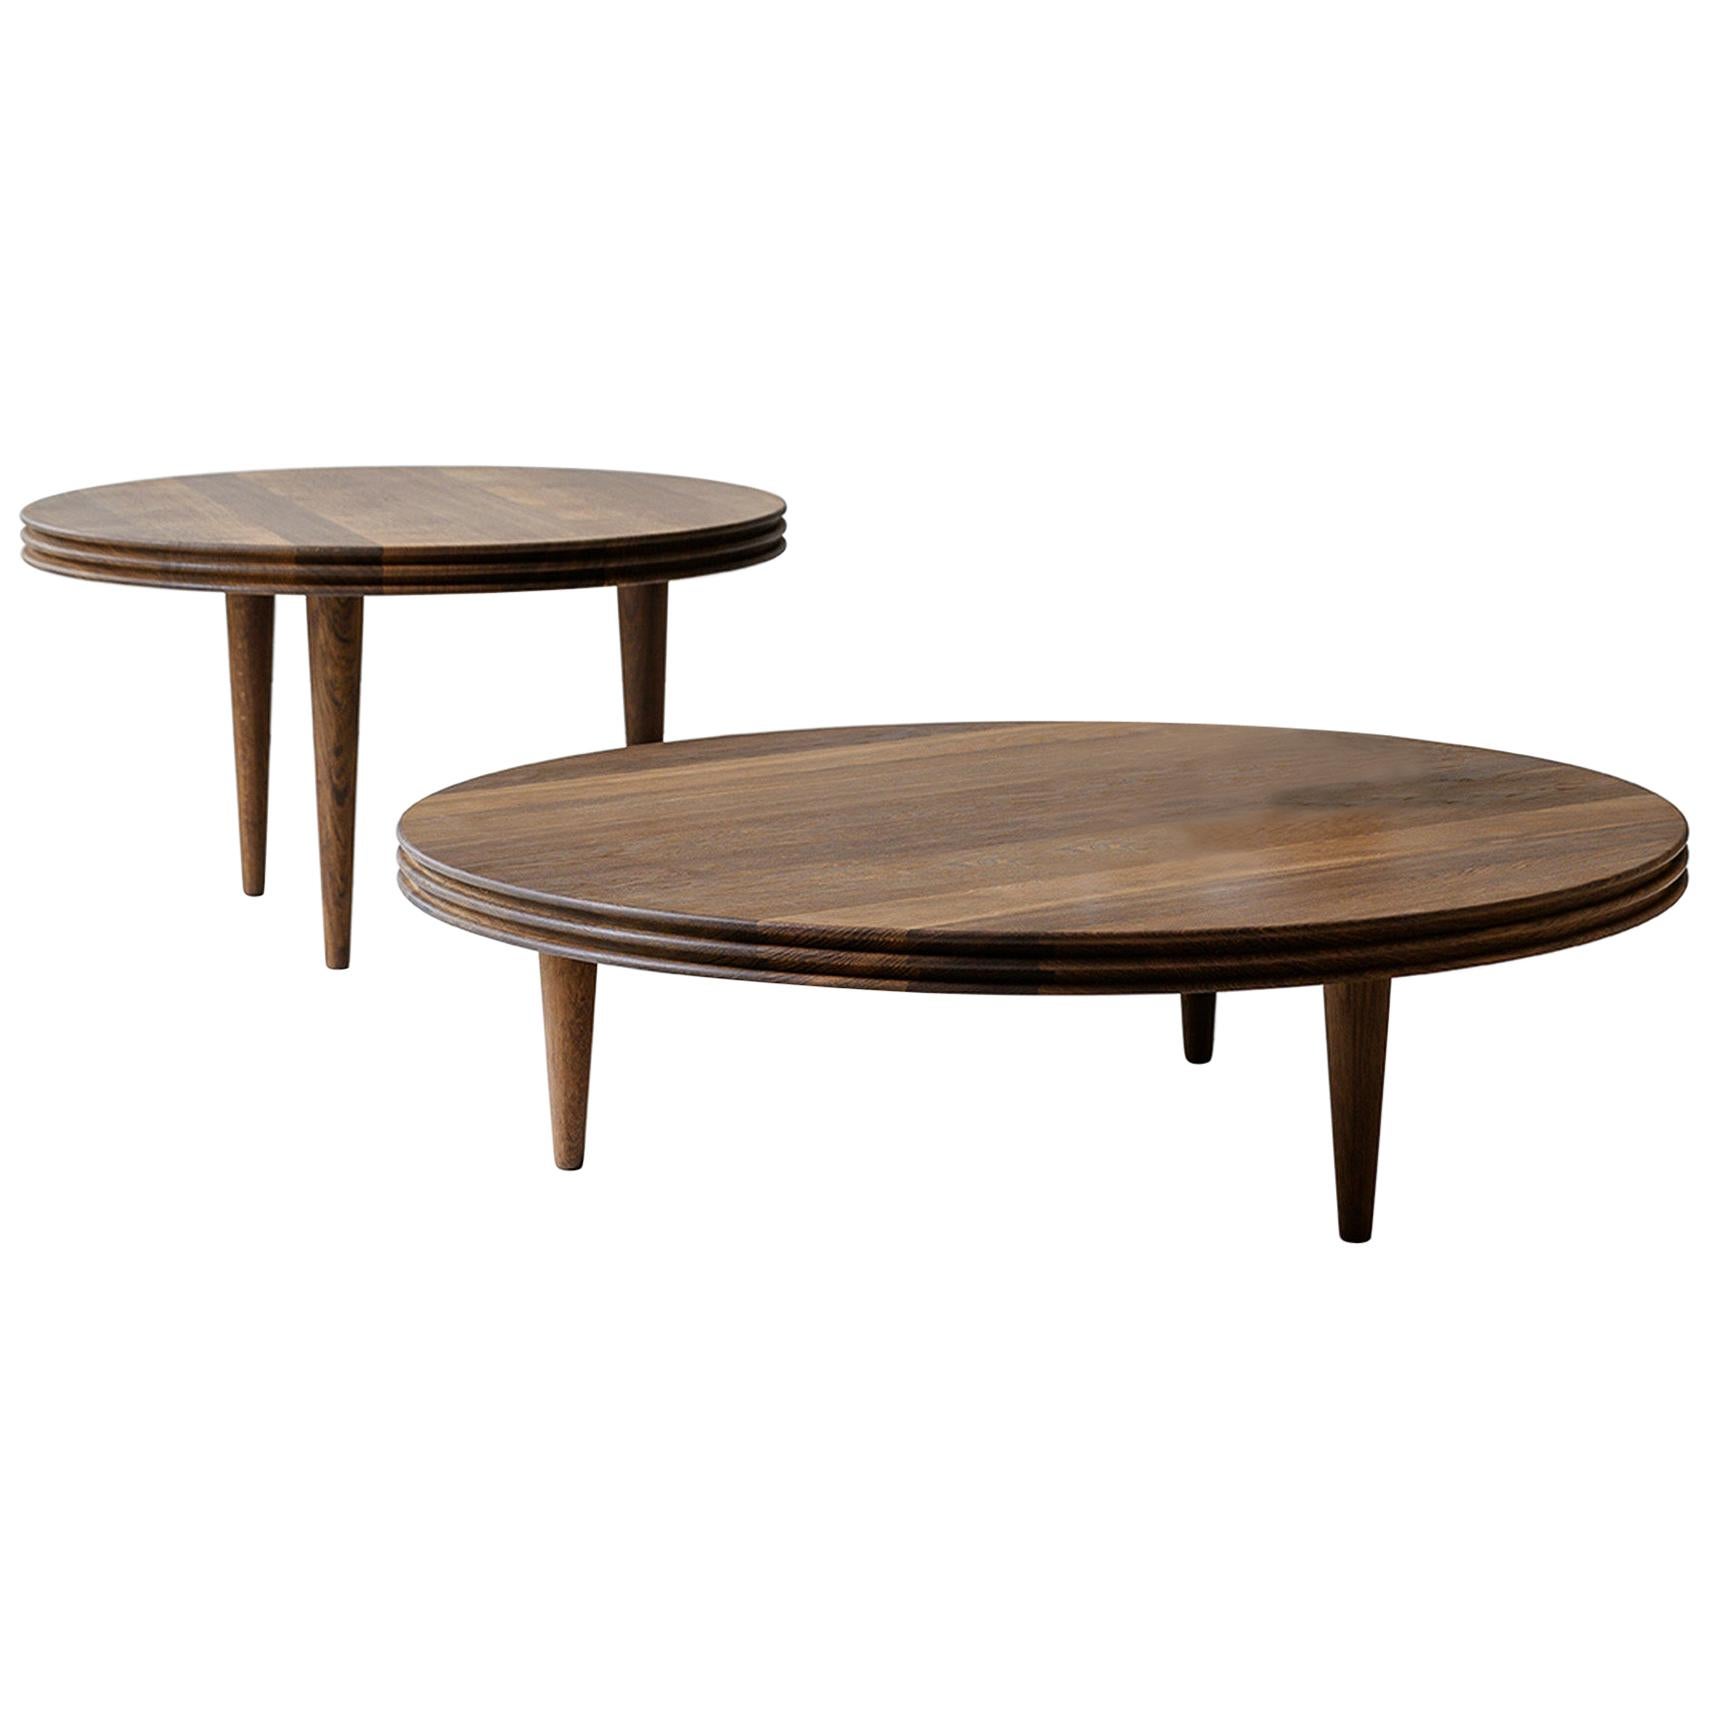 Customizable Coffee Table Groove, More Sizes, More Wood Finishes For Sale